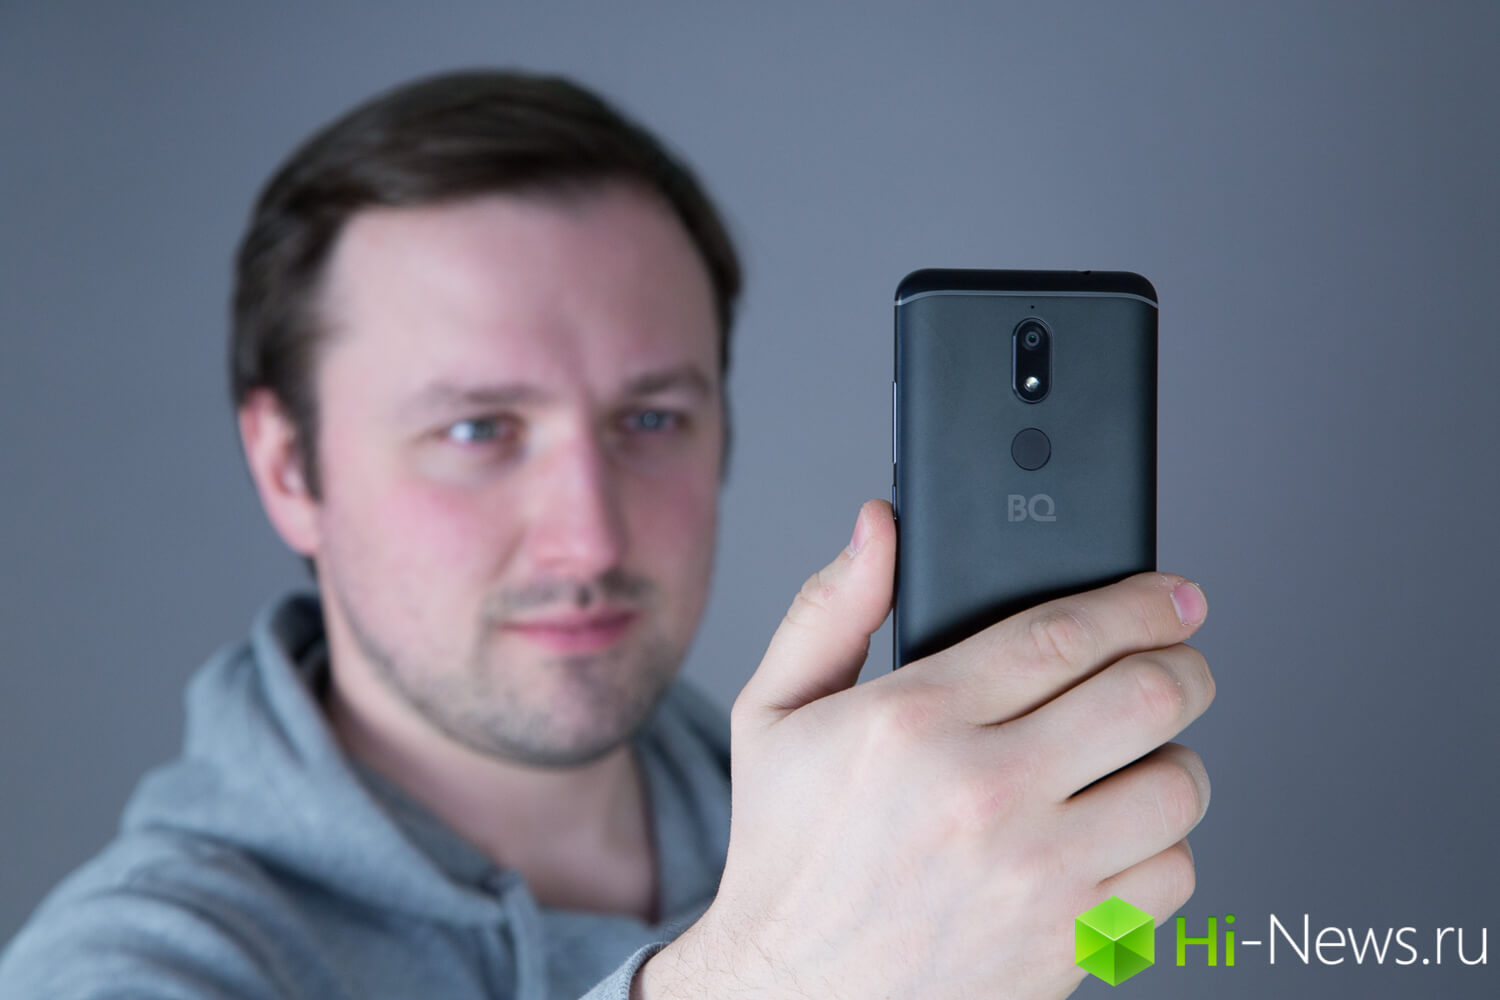 Review for smartphone BQ Space X: it would seem, what does Elon Musk?